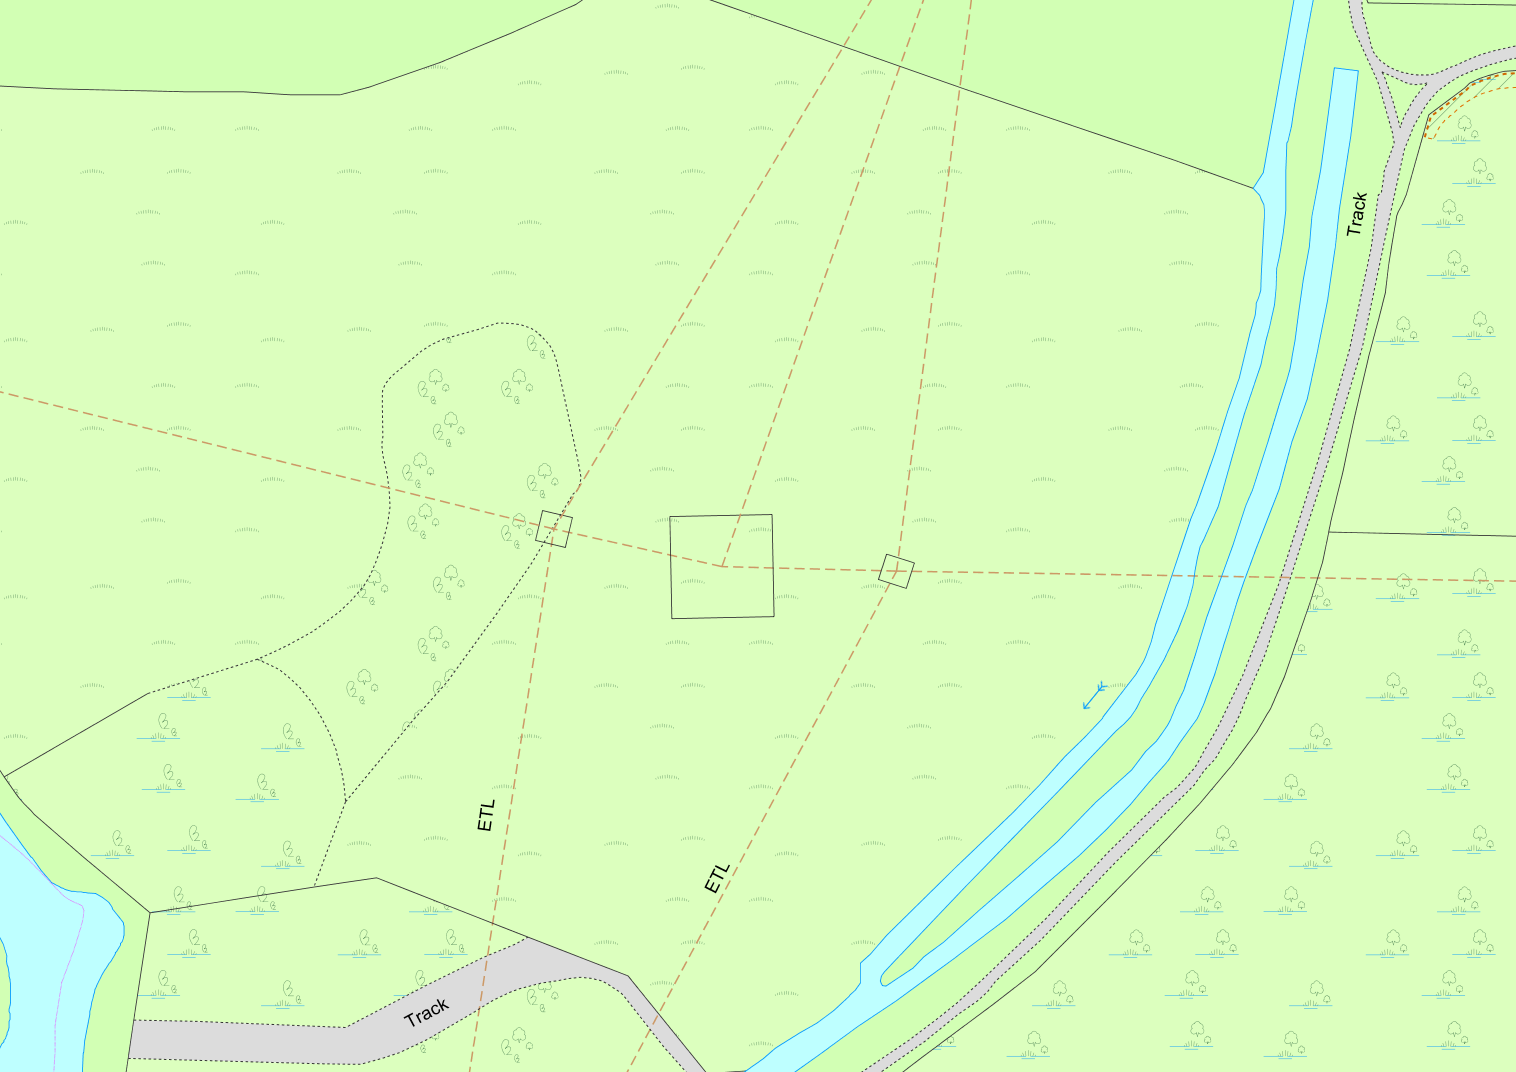 OS MasterMap Topography Layer with pylons recorded as individual data features which appear as squares